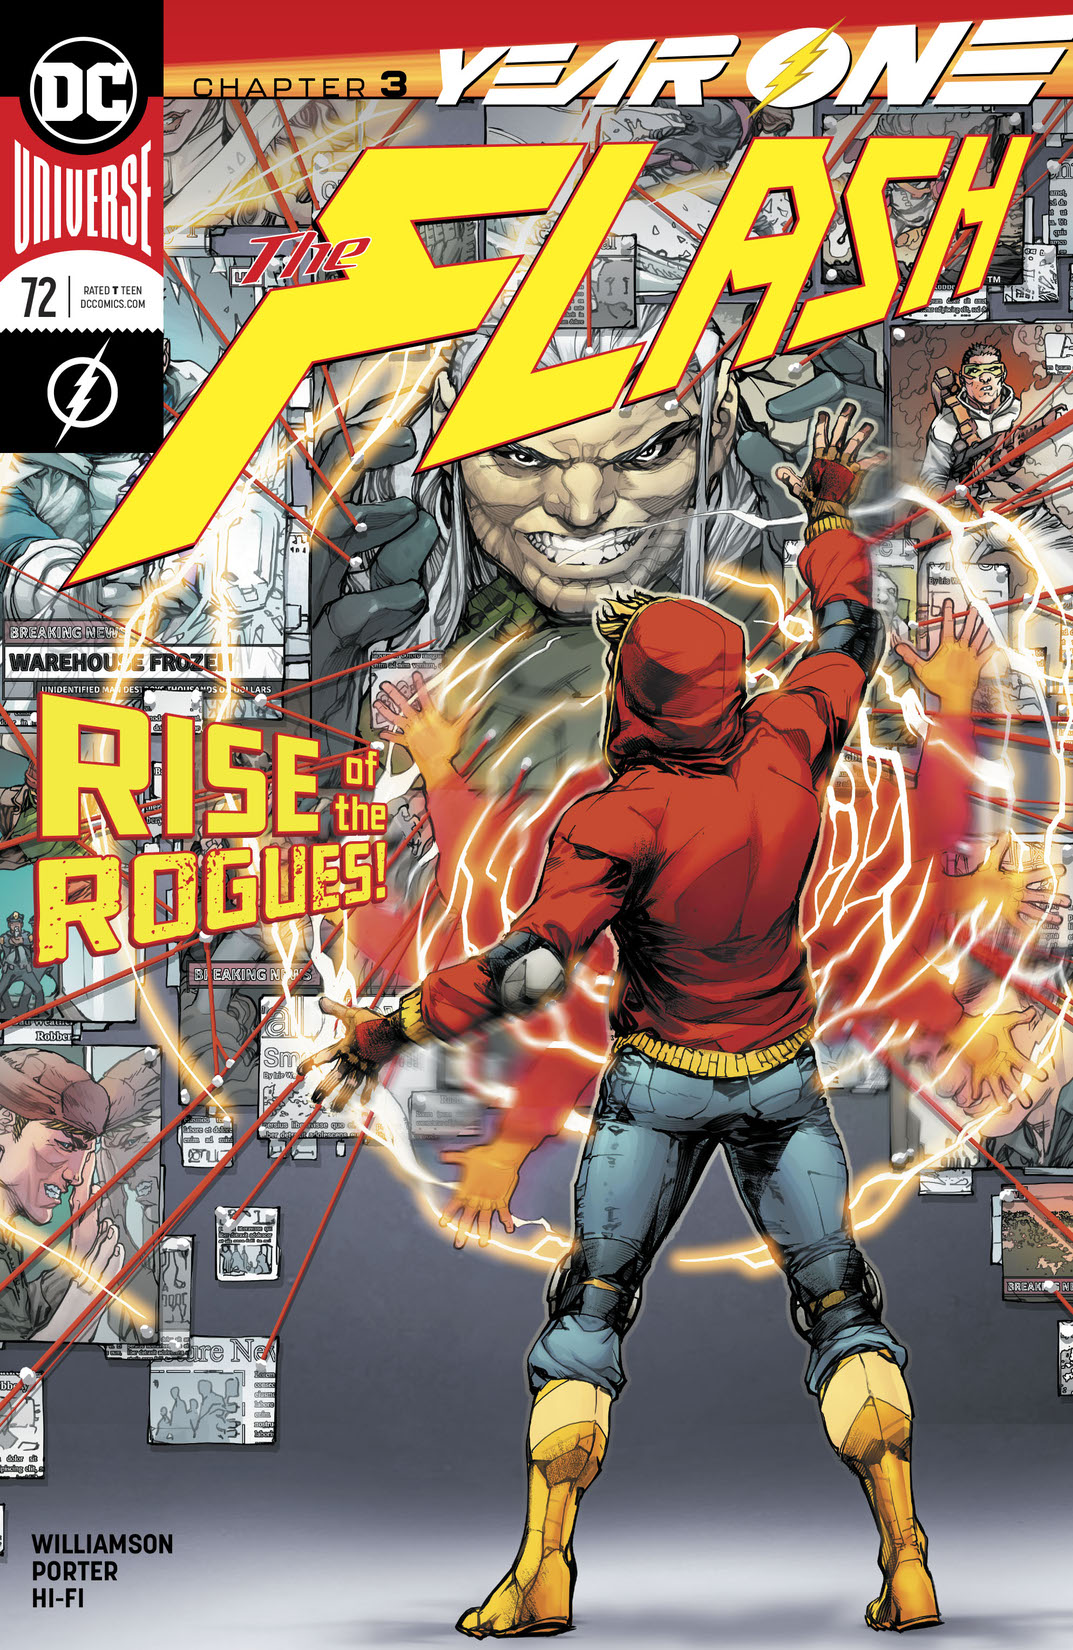 The Flash (2016-) #72 preview images